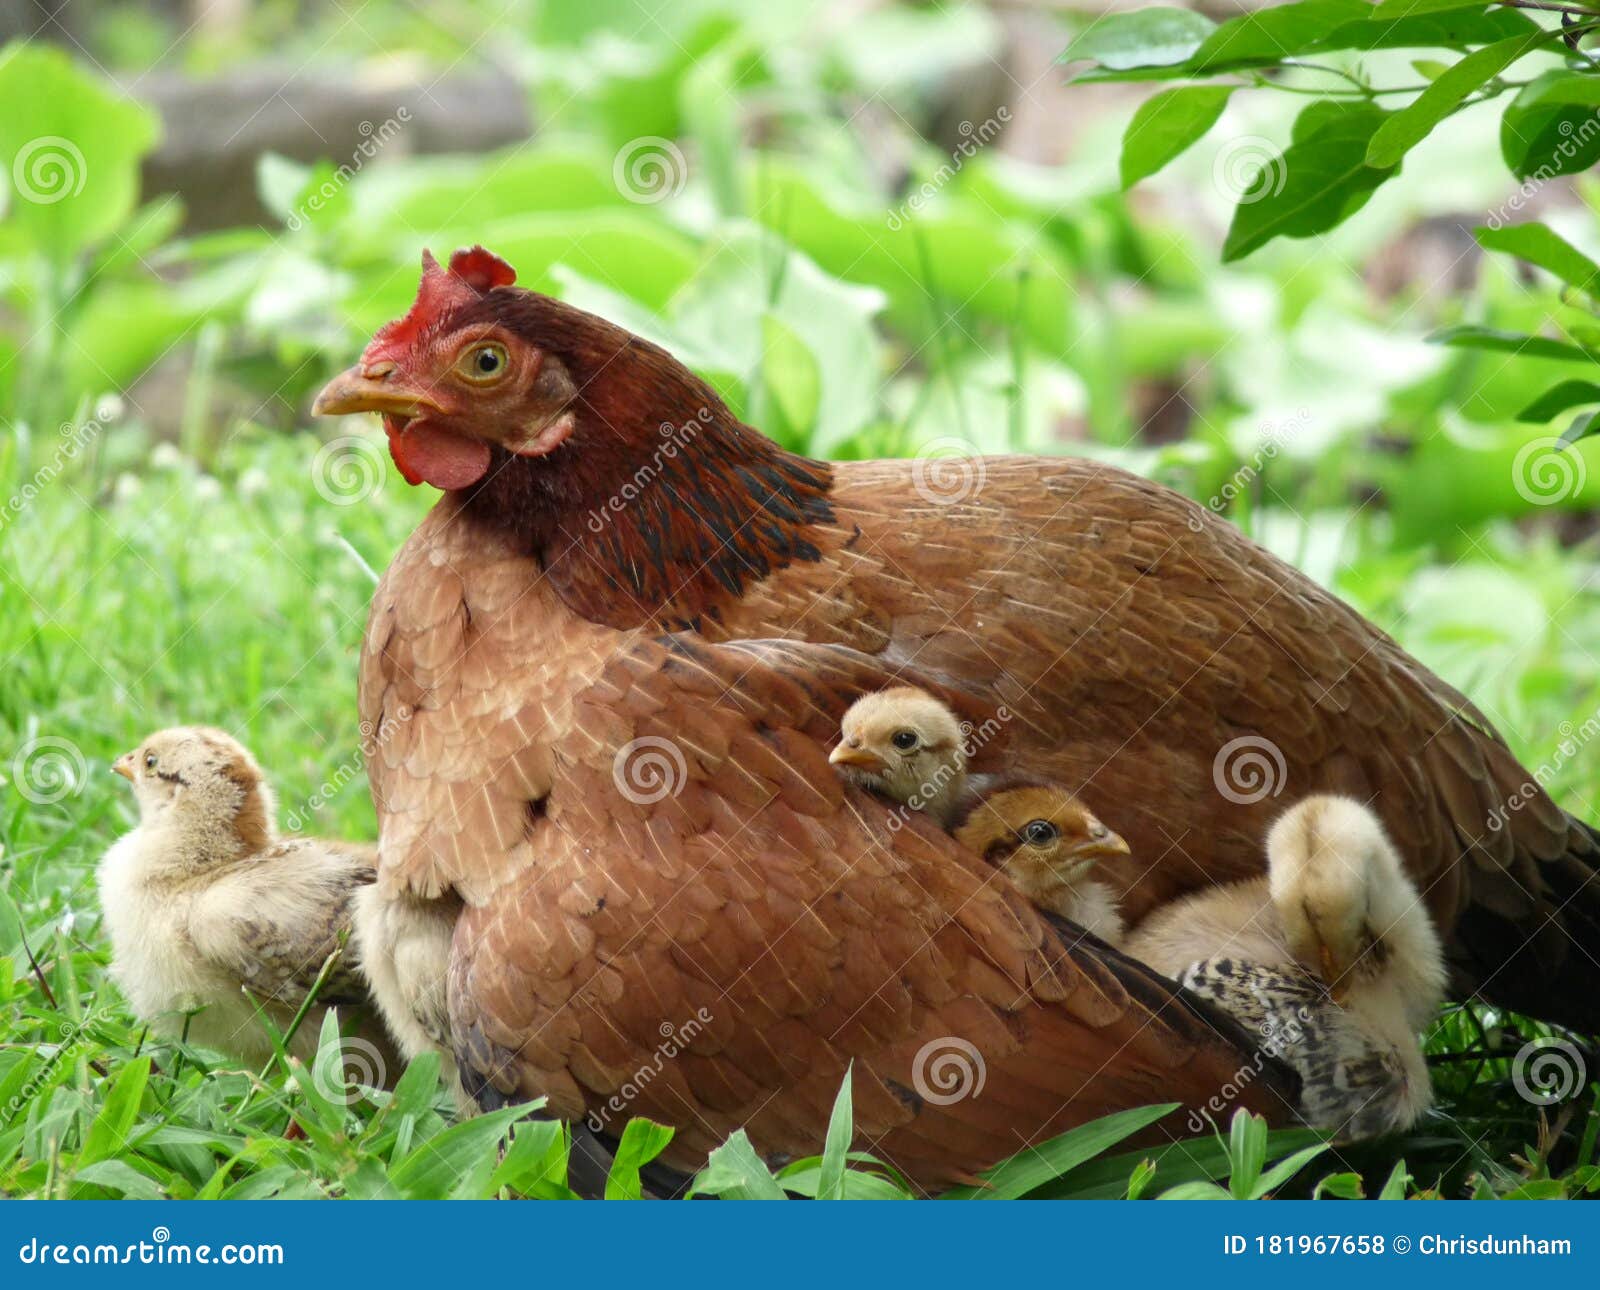 https://thumbs.dreamstime.com/z/endearing-image-mother-hen-protecting-her-chicks-representing-concept-caring-feeling-safe-loved-under-mum-s-wing-close-181967658.jpg